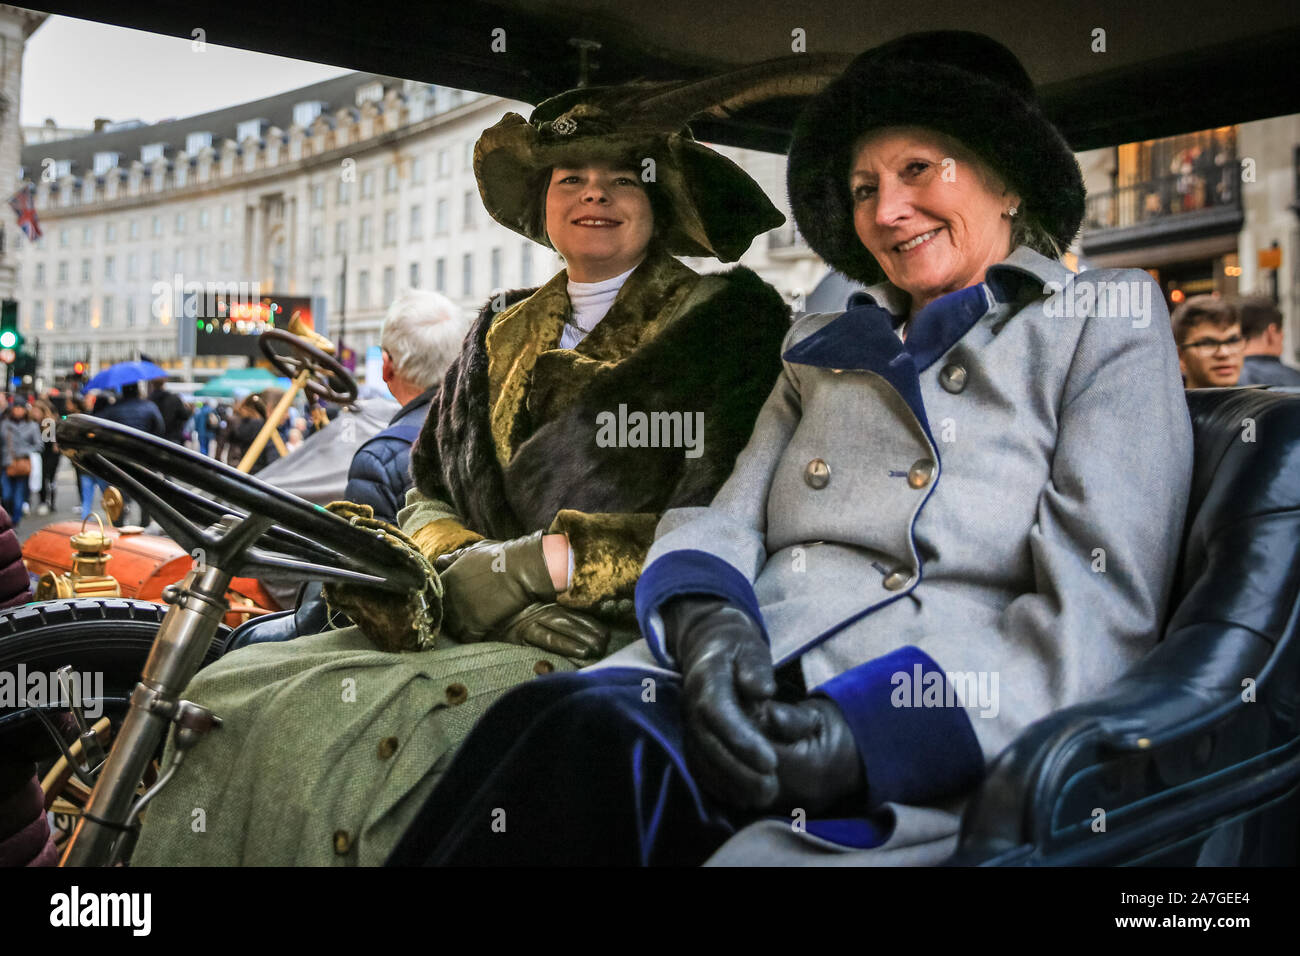 Regent Street, London, UK, 02nd Nov 2019. Two ladies in Victorian outfits in a classic car, part of the Concours d’Elegance of veteran cars, with over 100 pre-1905 motors. London's Regent Street is pedestrianised for the day to host the annual Route 66 Regent Street Motor Show, featuring a full spectrum of beautiful cars on display to the public, from classic motors to famous supercars, Ultra Low electric vehicles and iconic Route 66 Americana automobiles. Credit: Imageplotter/Alamy Live News Stock Photo